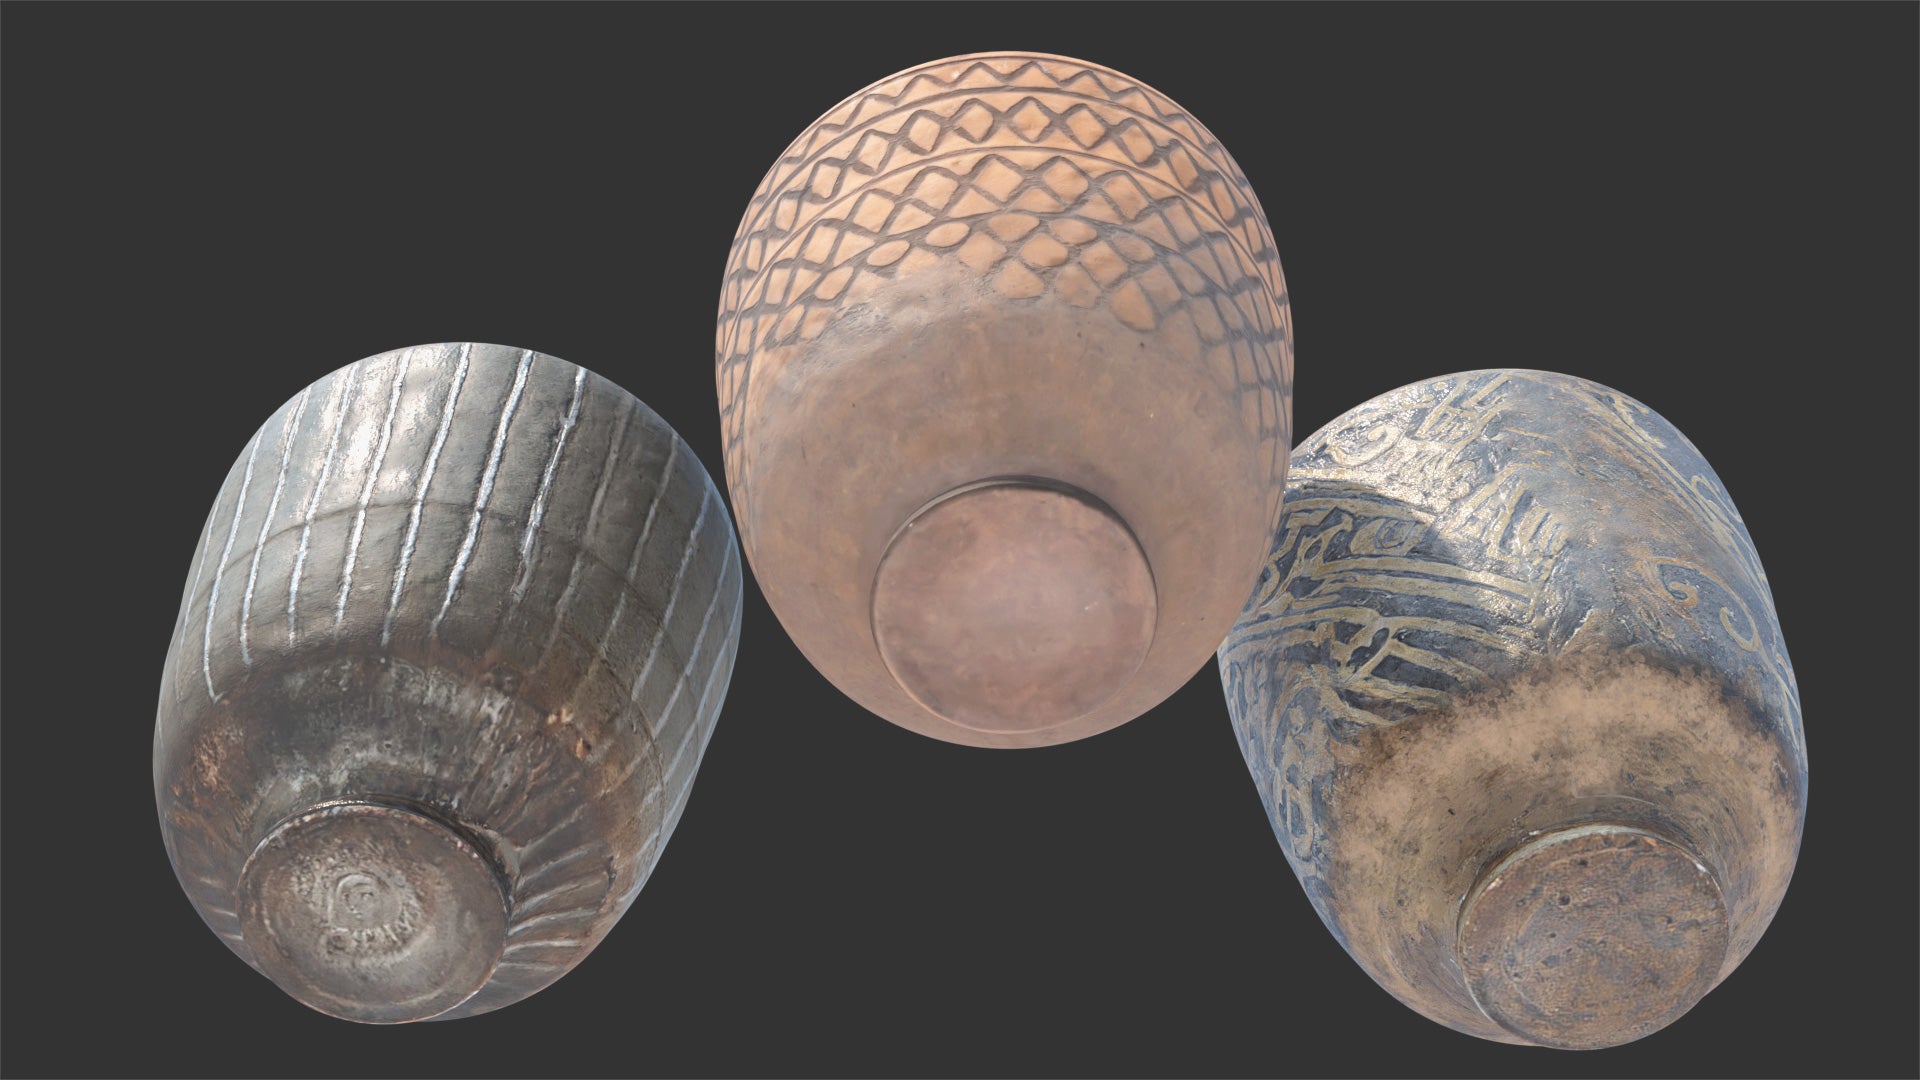 3D model of three ornamental rustic cups made of clay. Lowpoly and PBR textures make them game ready and perfect for the metaverse